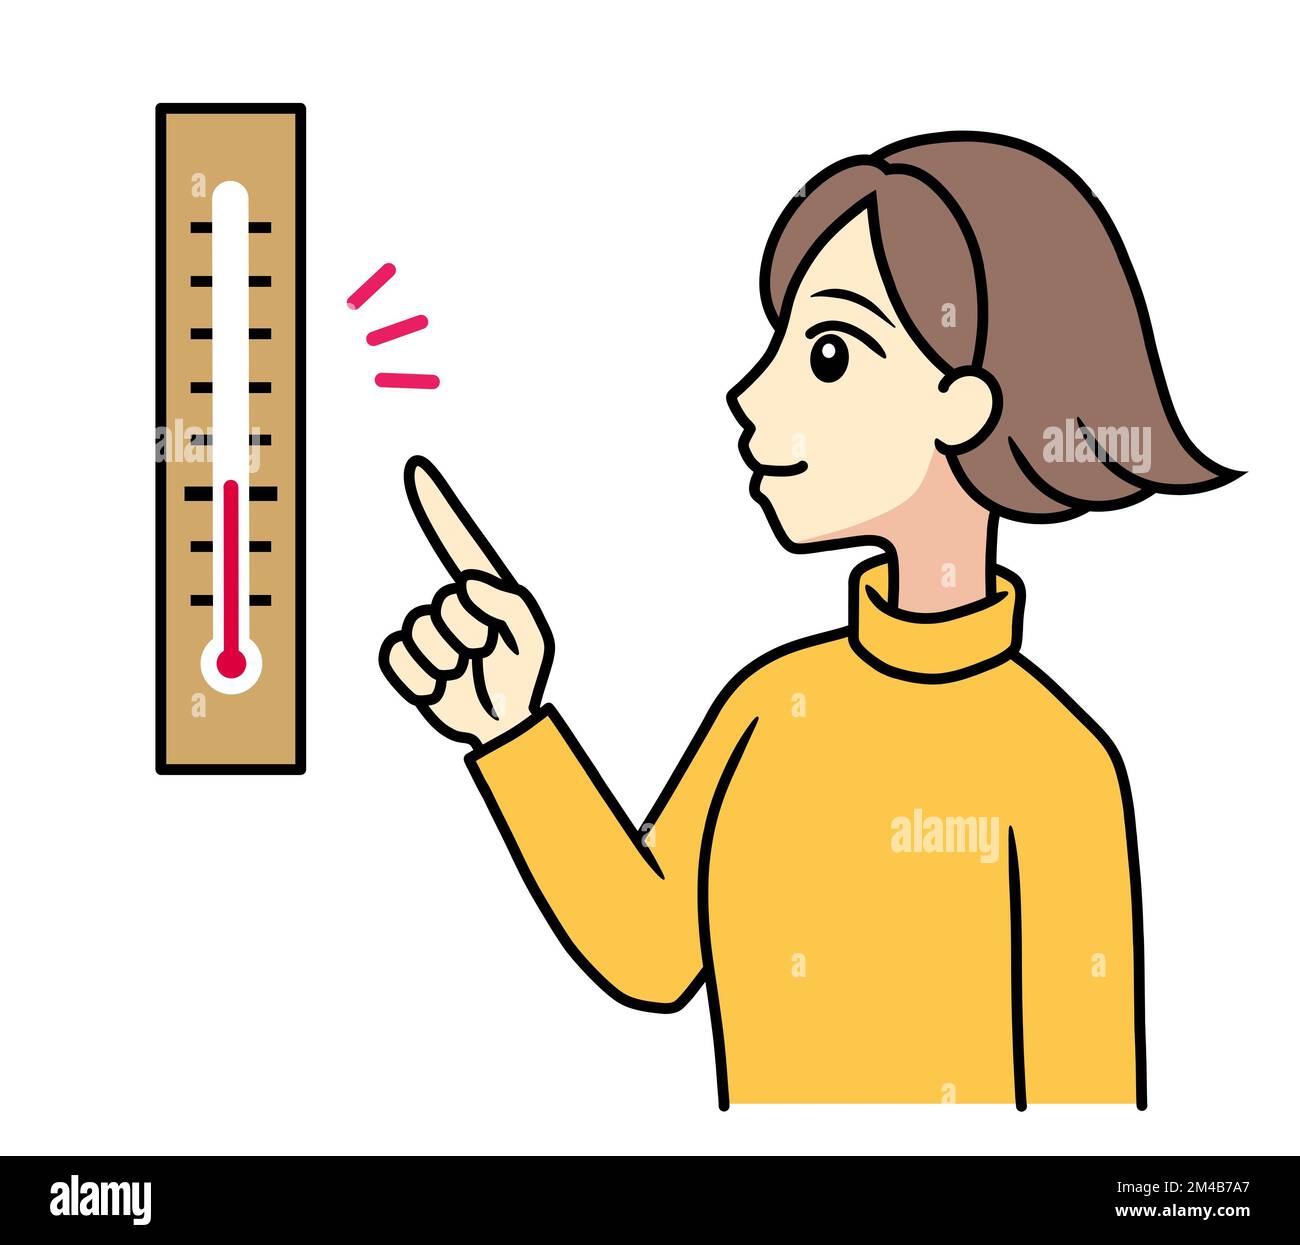 https://c8.alamy.com/comp/2M4B7A7/a-young-woman-checking-a-temperature-with-a-thermometer-2M4B7A7.jpg